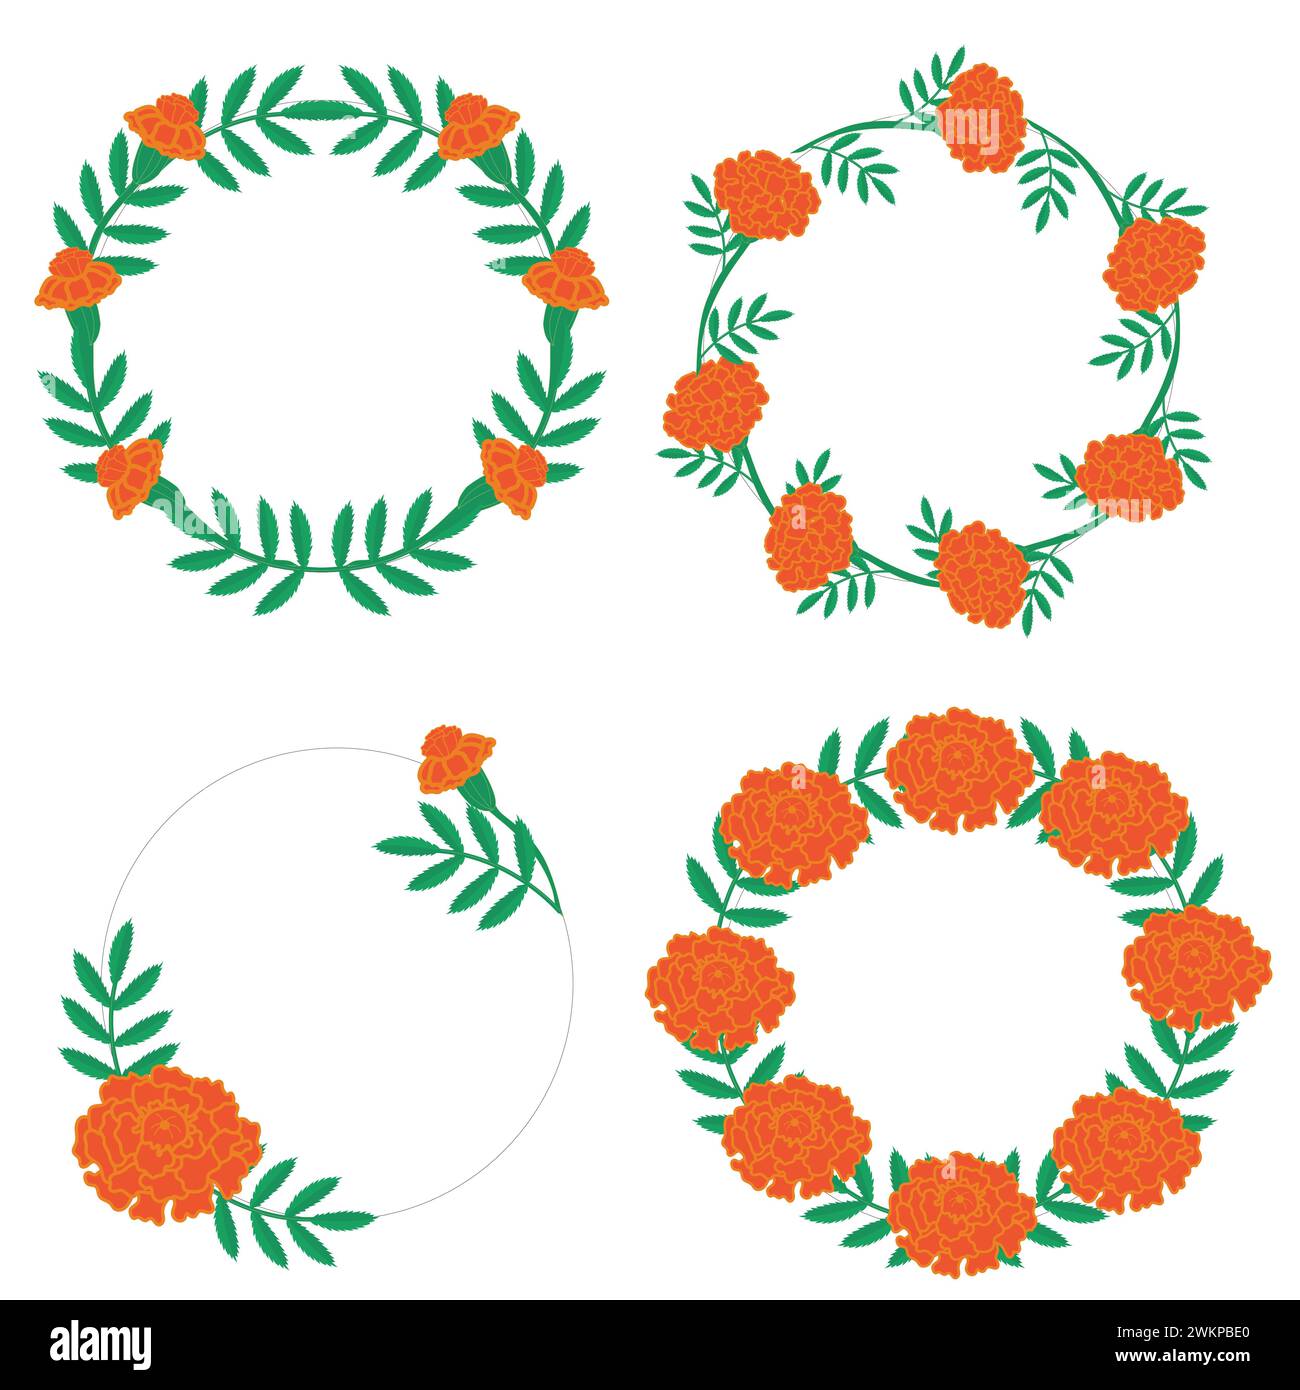 Set of wreaths of marigold flowers. Vector illustration isolated on white background. Stock Vector